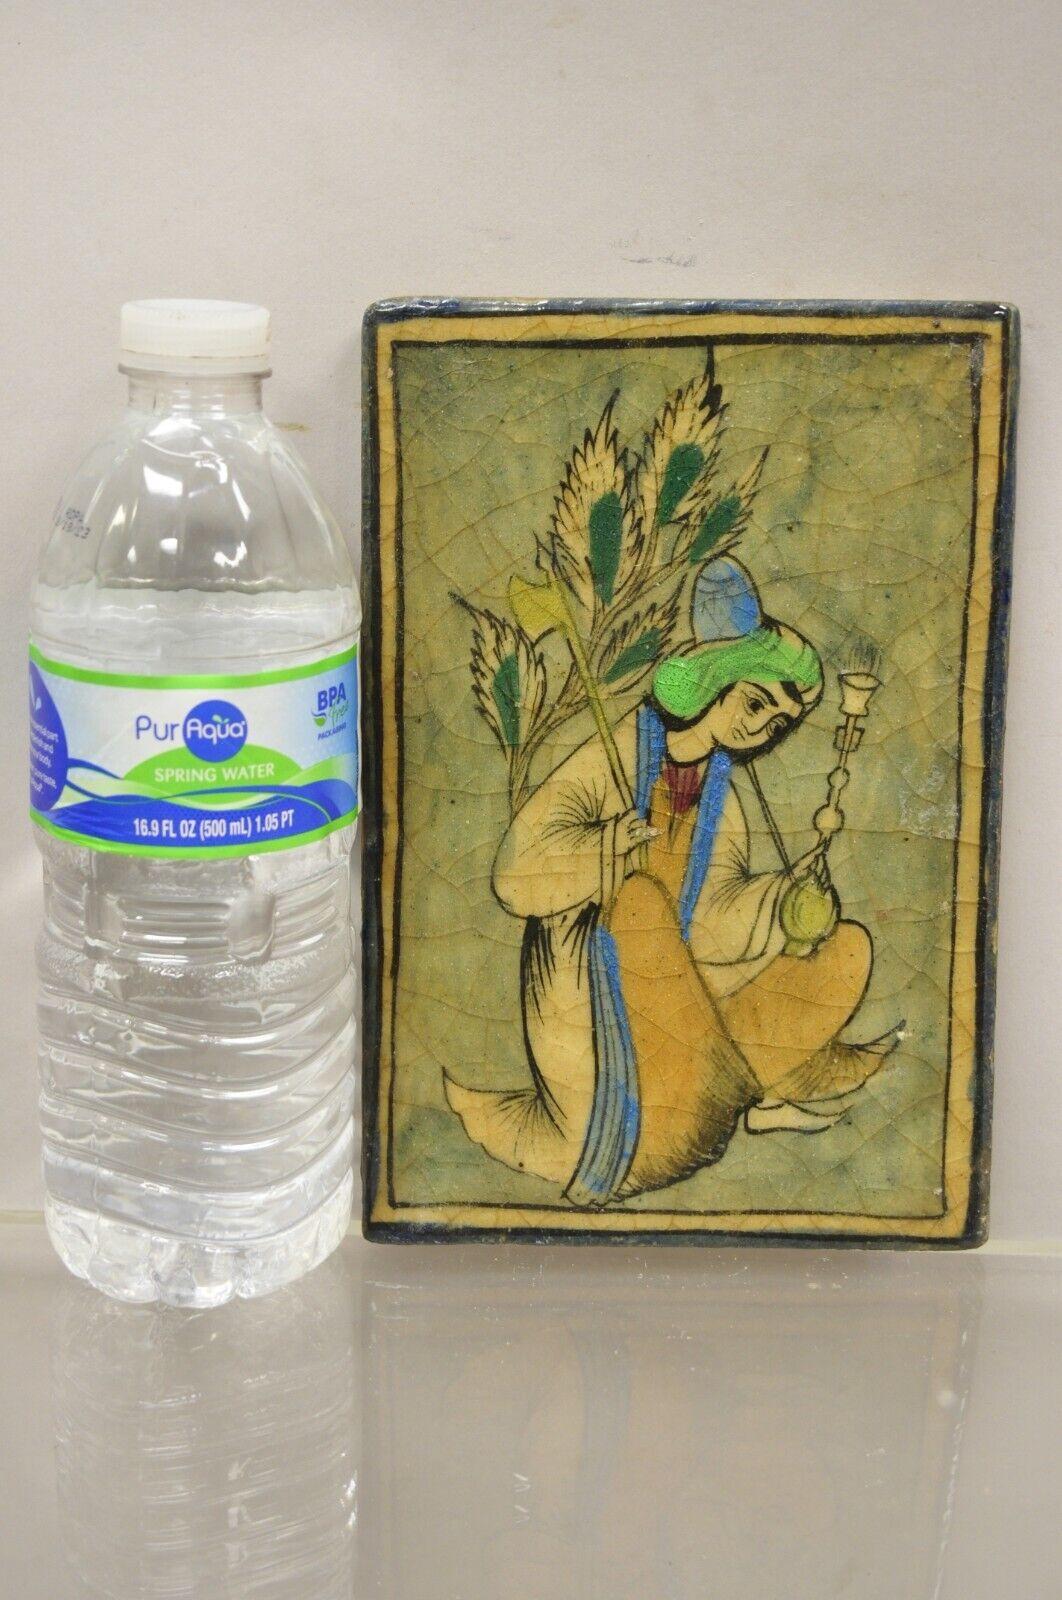 Antique Persian Iznik Qajar style green ceramic pottery Tile Kneeling woman C5. Item features an original crackle glazed finish, heavy ceramic pottery construction, very impressive detail, wonderful style and form. Great to mount as wall art or